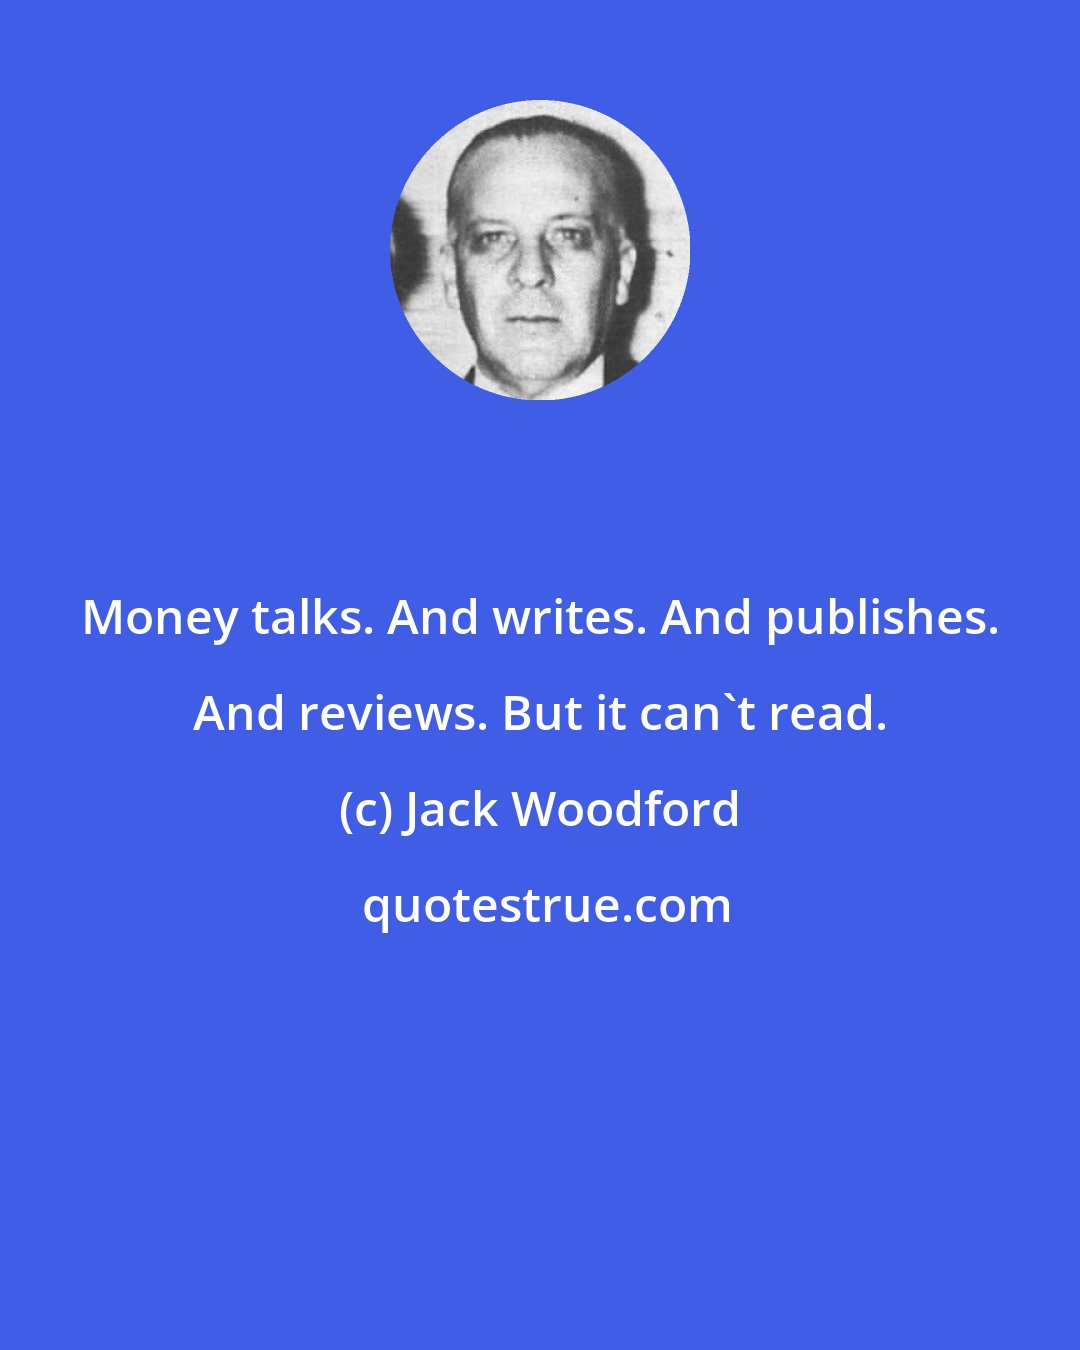 Jack Woodford: Money talks. And writes. And publishes. And reviews. But it can't read.